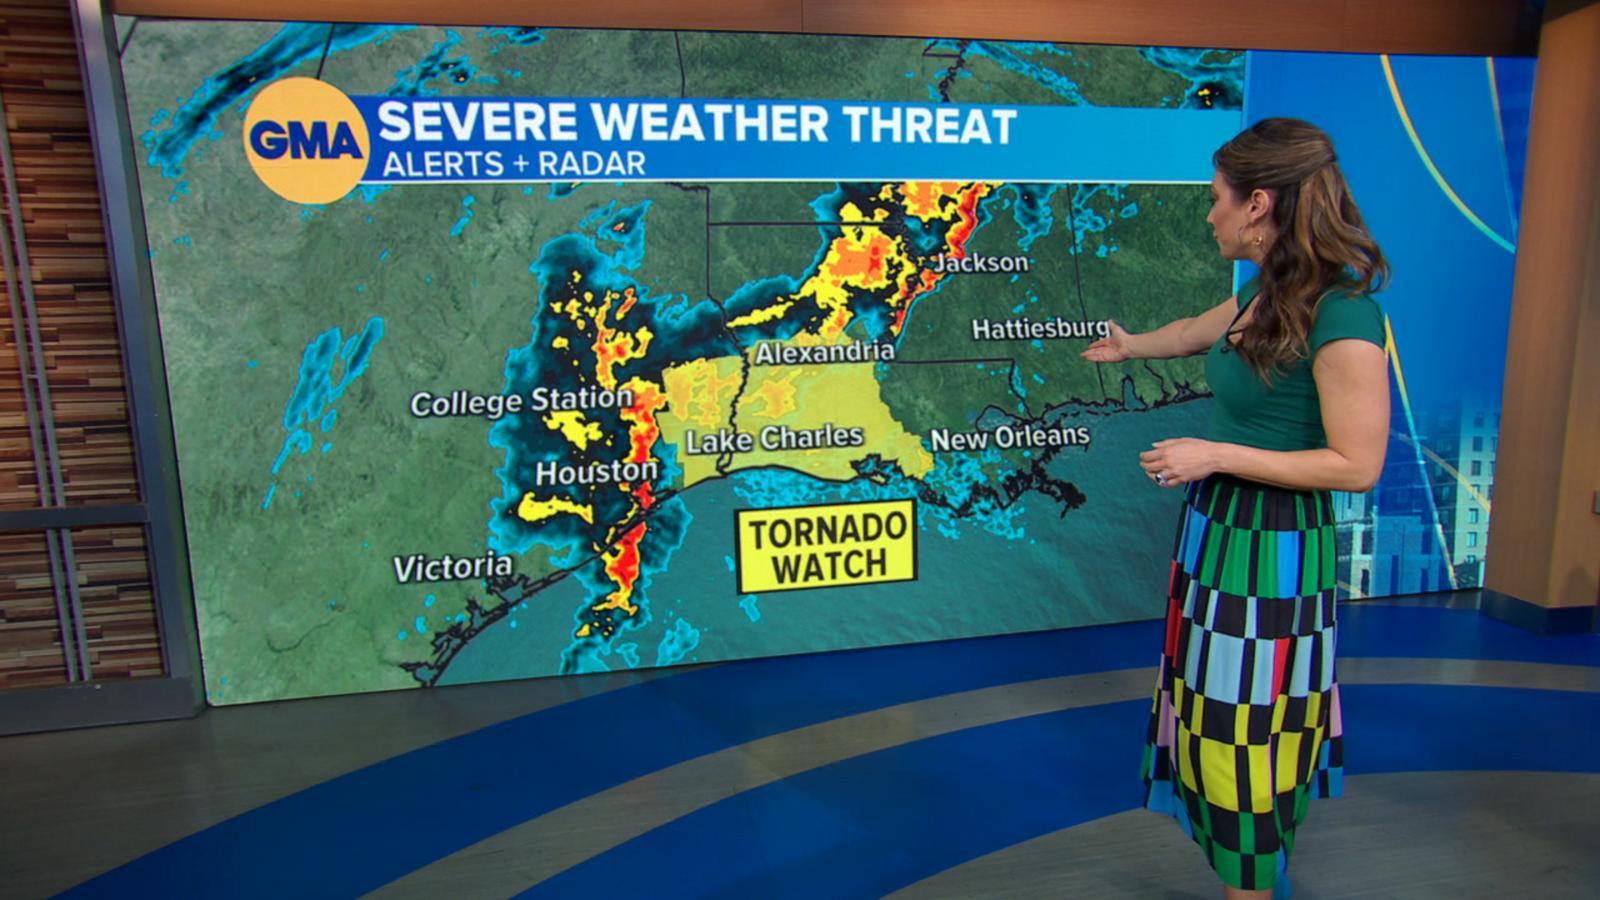 VIDEO: Severe weather threat targets South